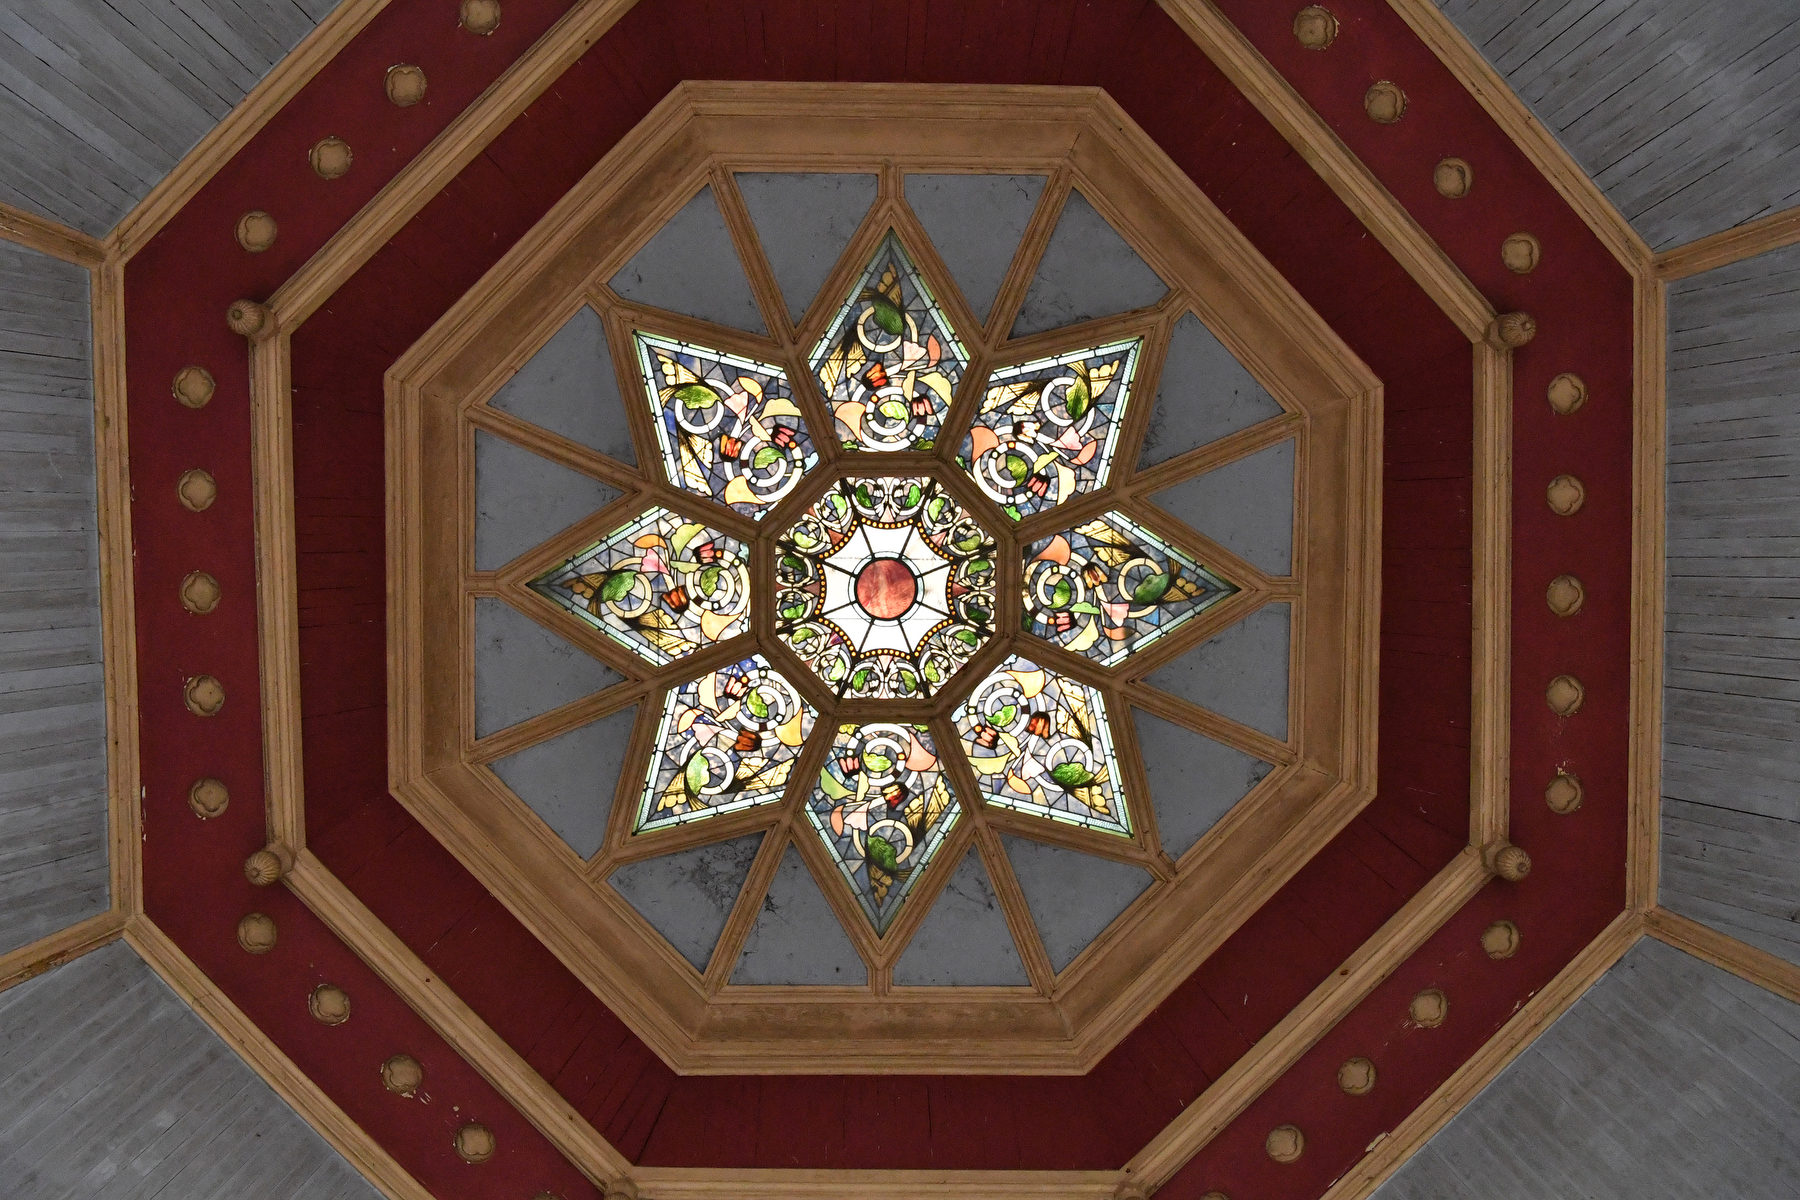 The pavilion’s stained glass roof. Photo: Paul Matinka